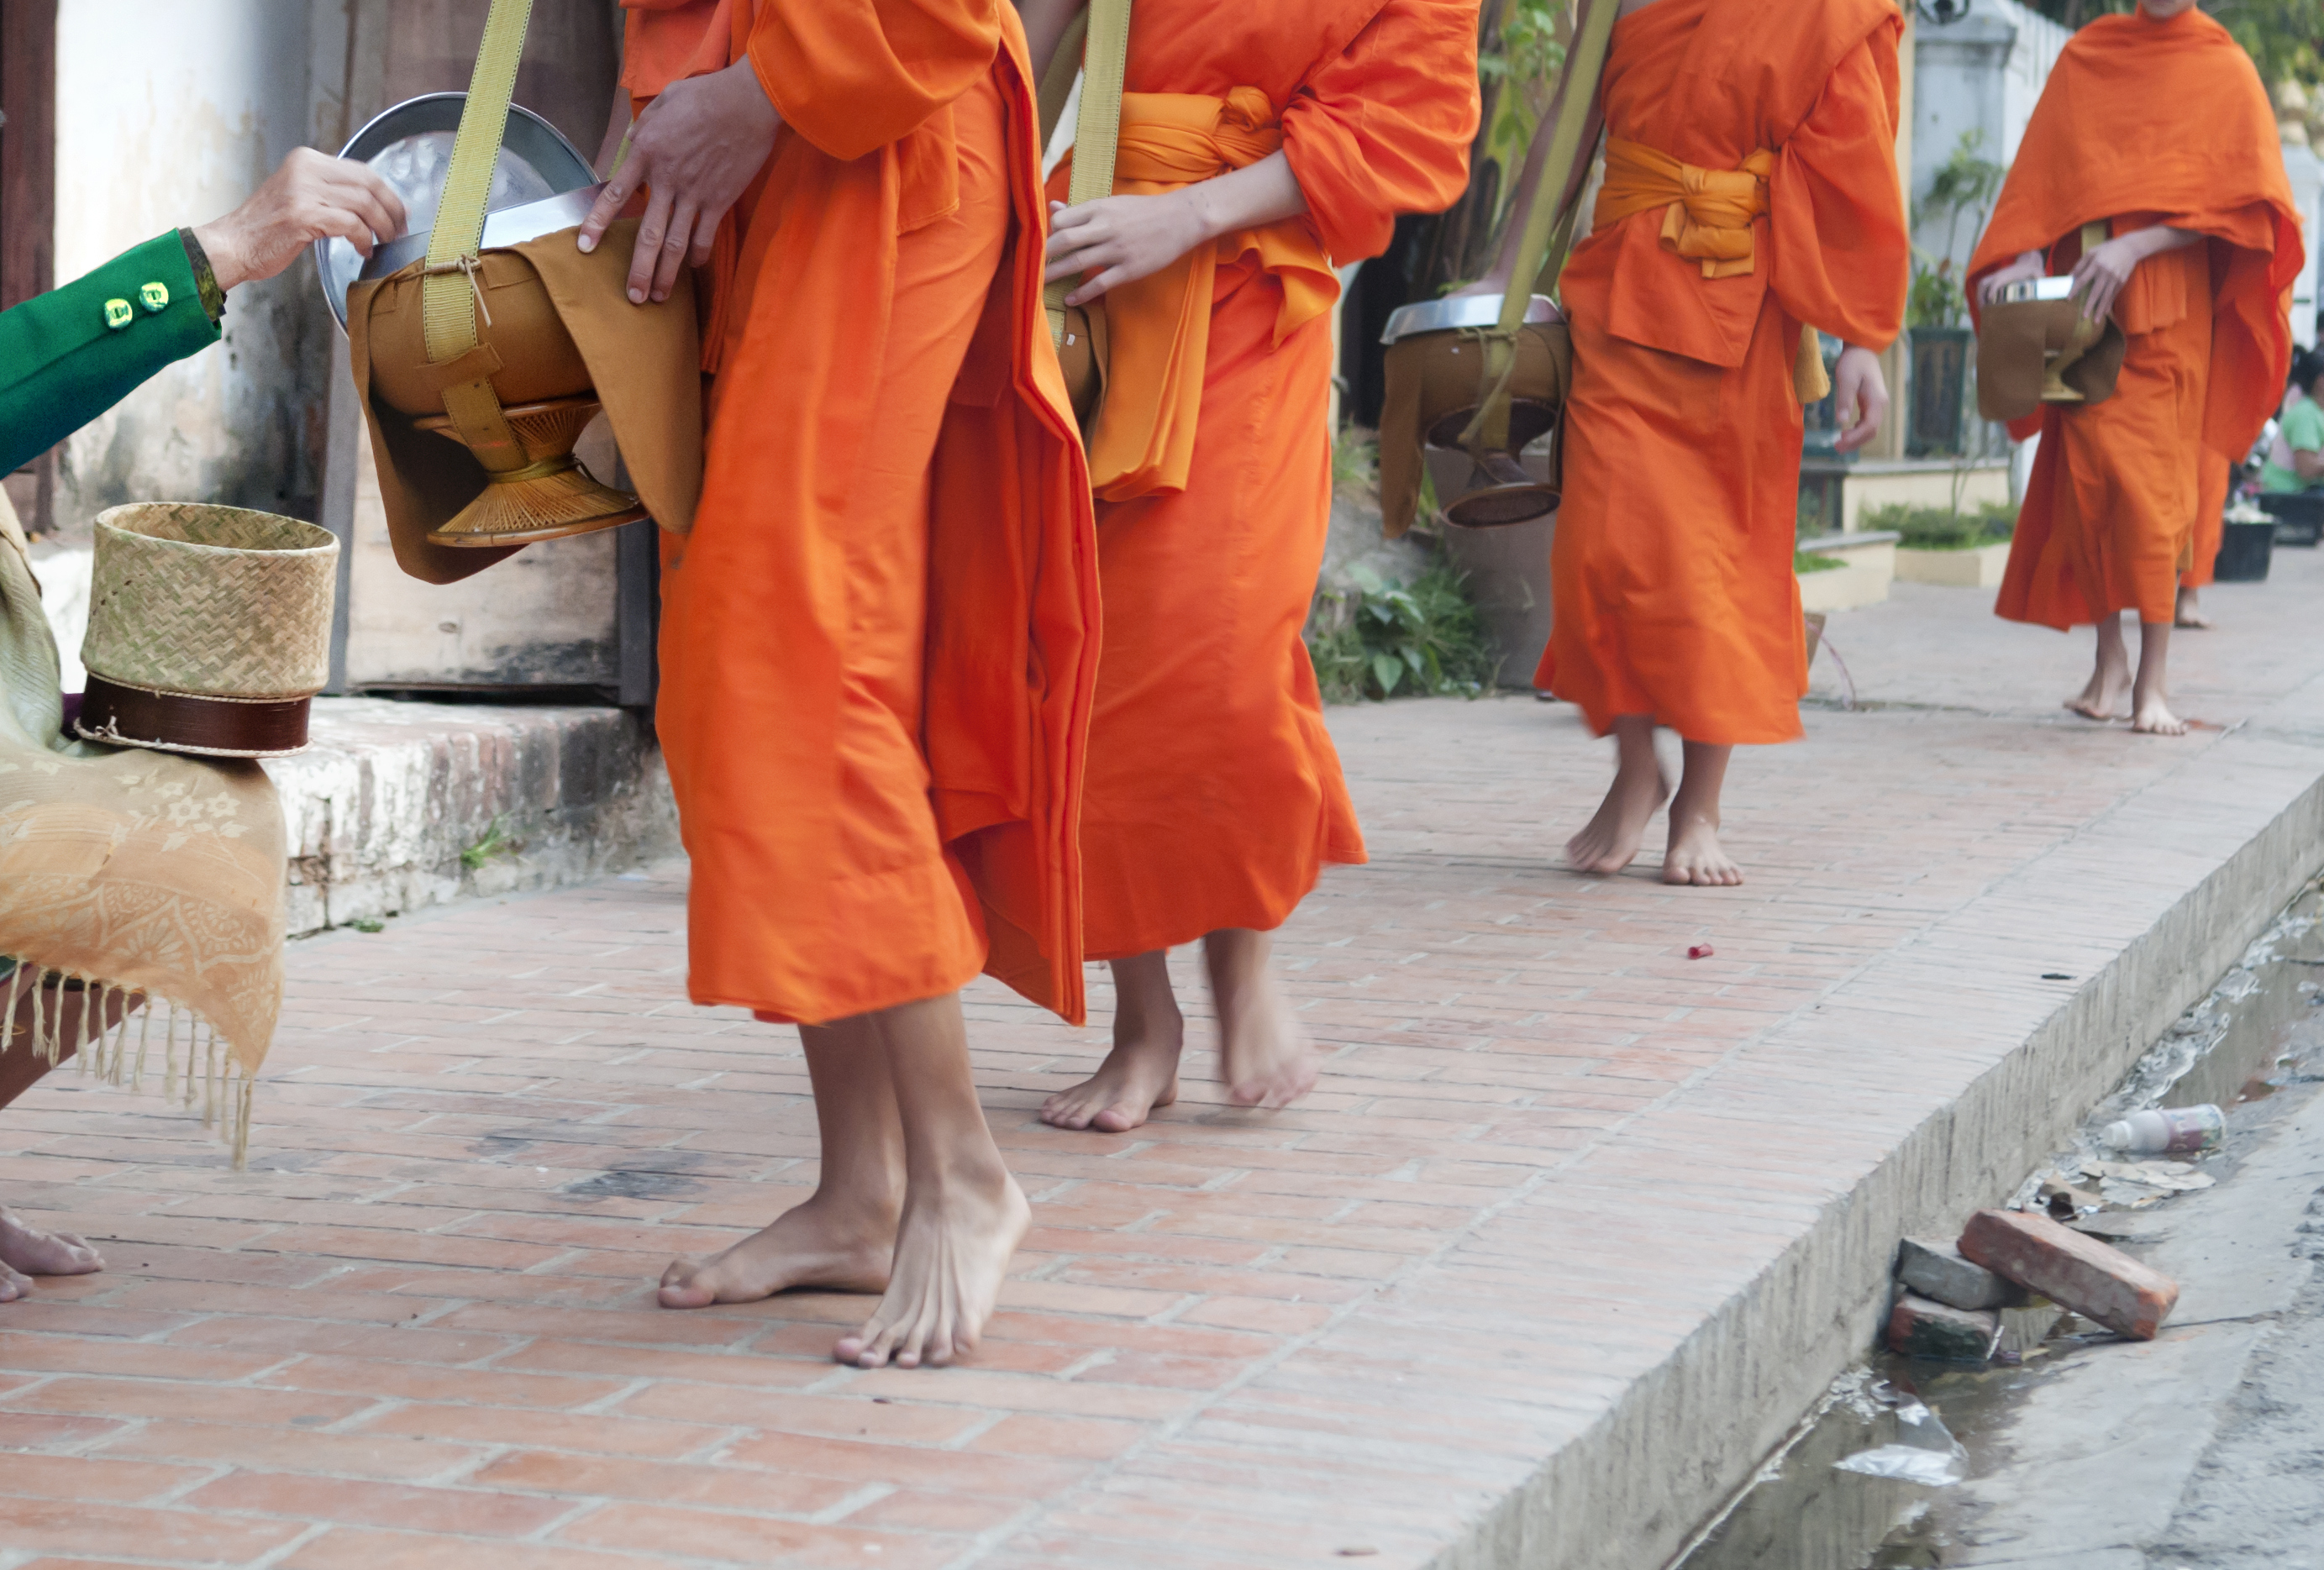 Monks wearing their traditional outfits, walking down the street collecting offerings from villagers